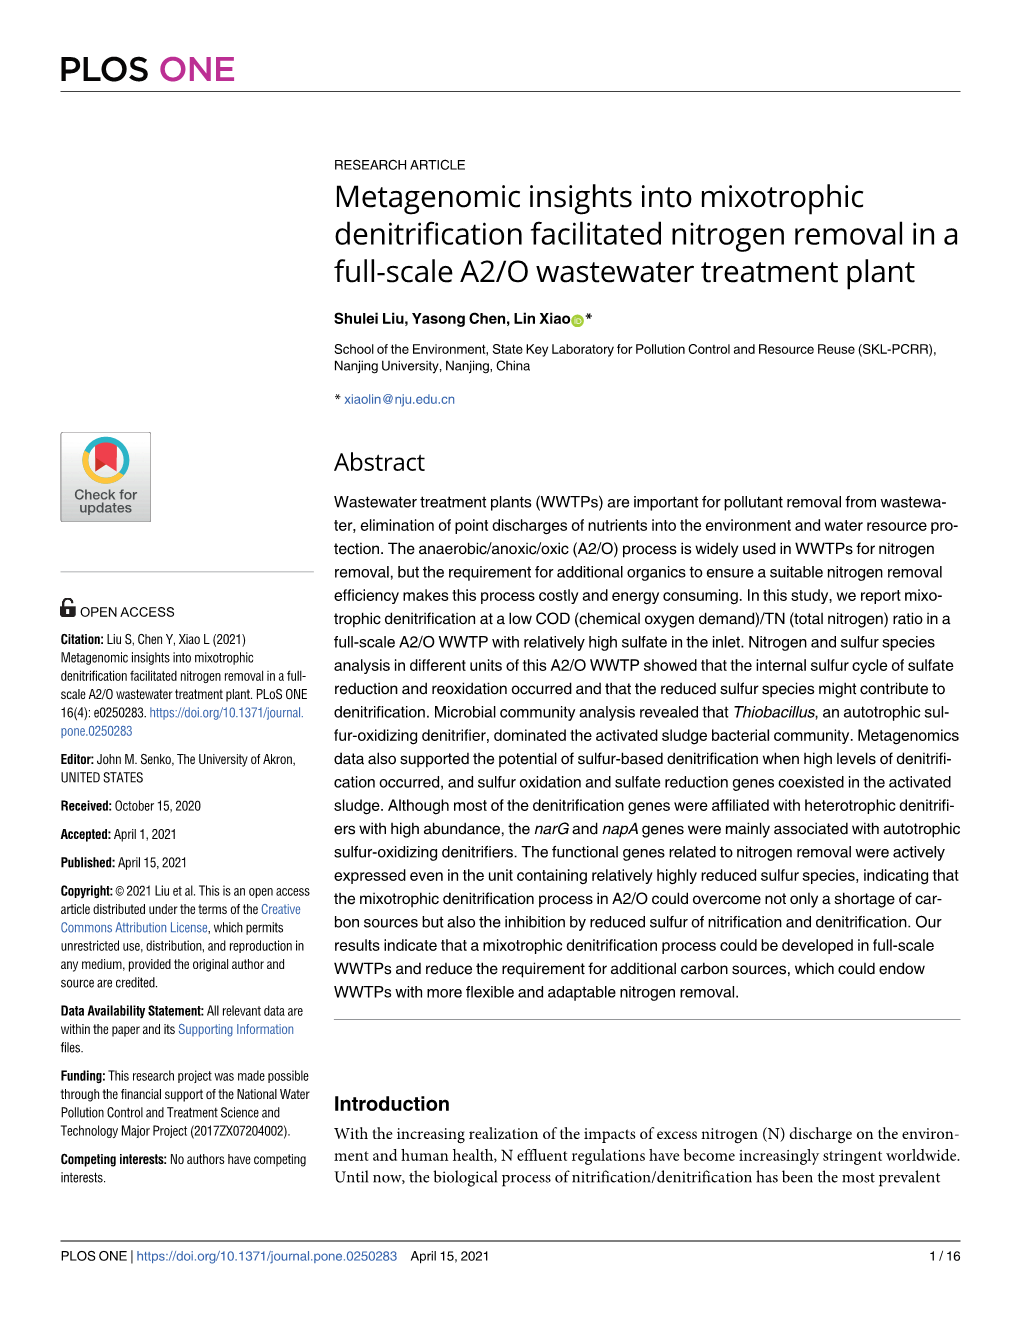 Metagenomic Insights Into Mixotrophic Denitrification Facilitated Nitrogen Removal in a Full-Scale A2/O Wastewater Treatment Plant